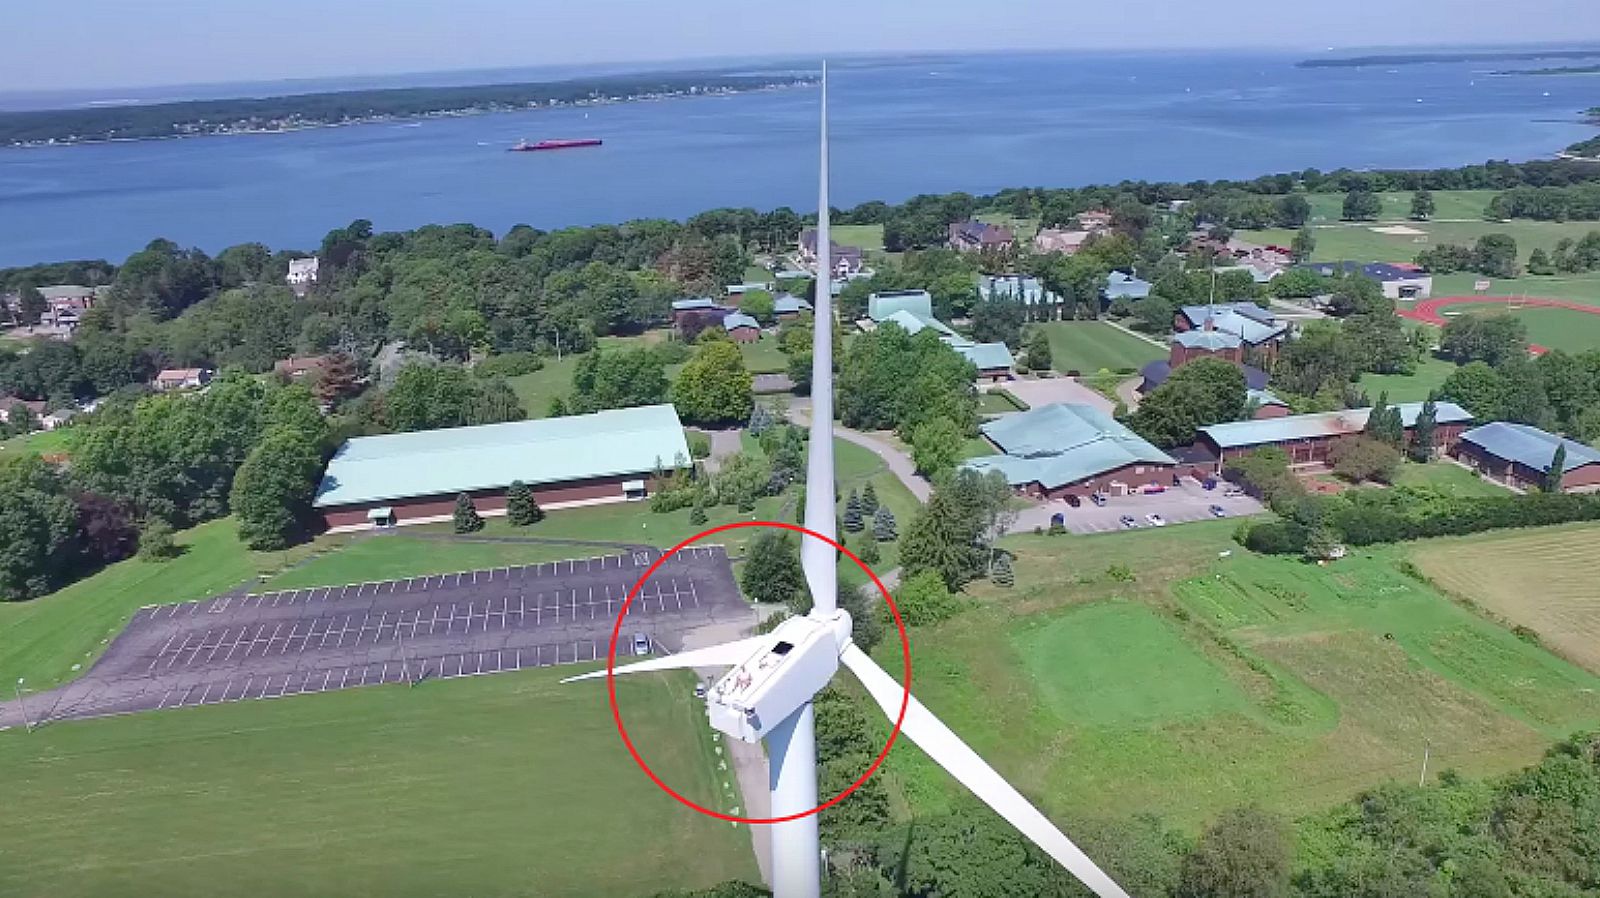 Drone Captures a Man Doing THIS 200 Feet in the Air on a Wind Turbine